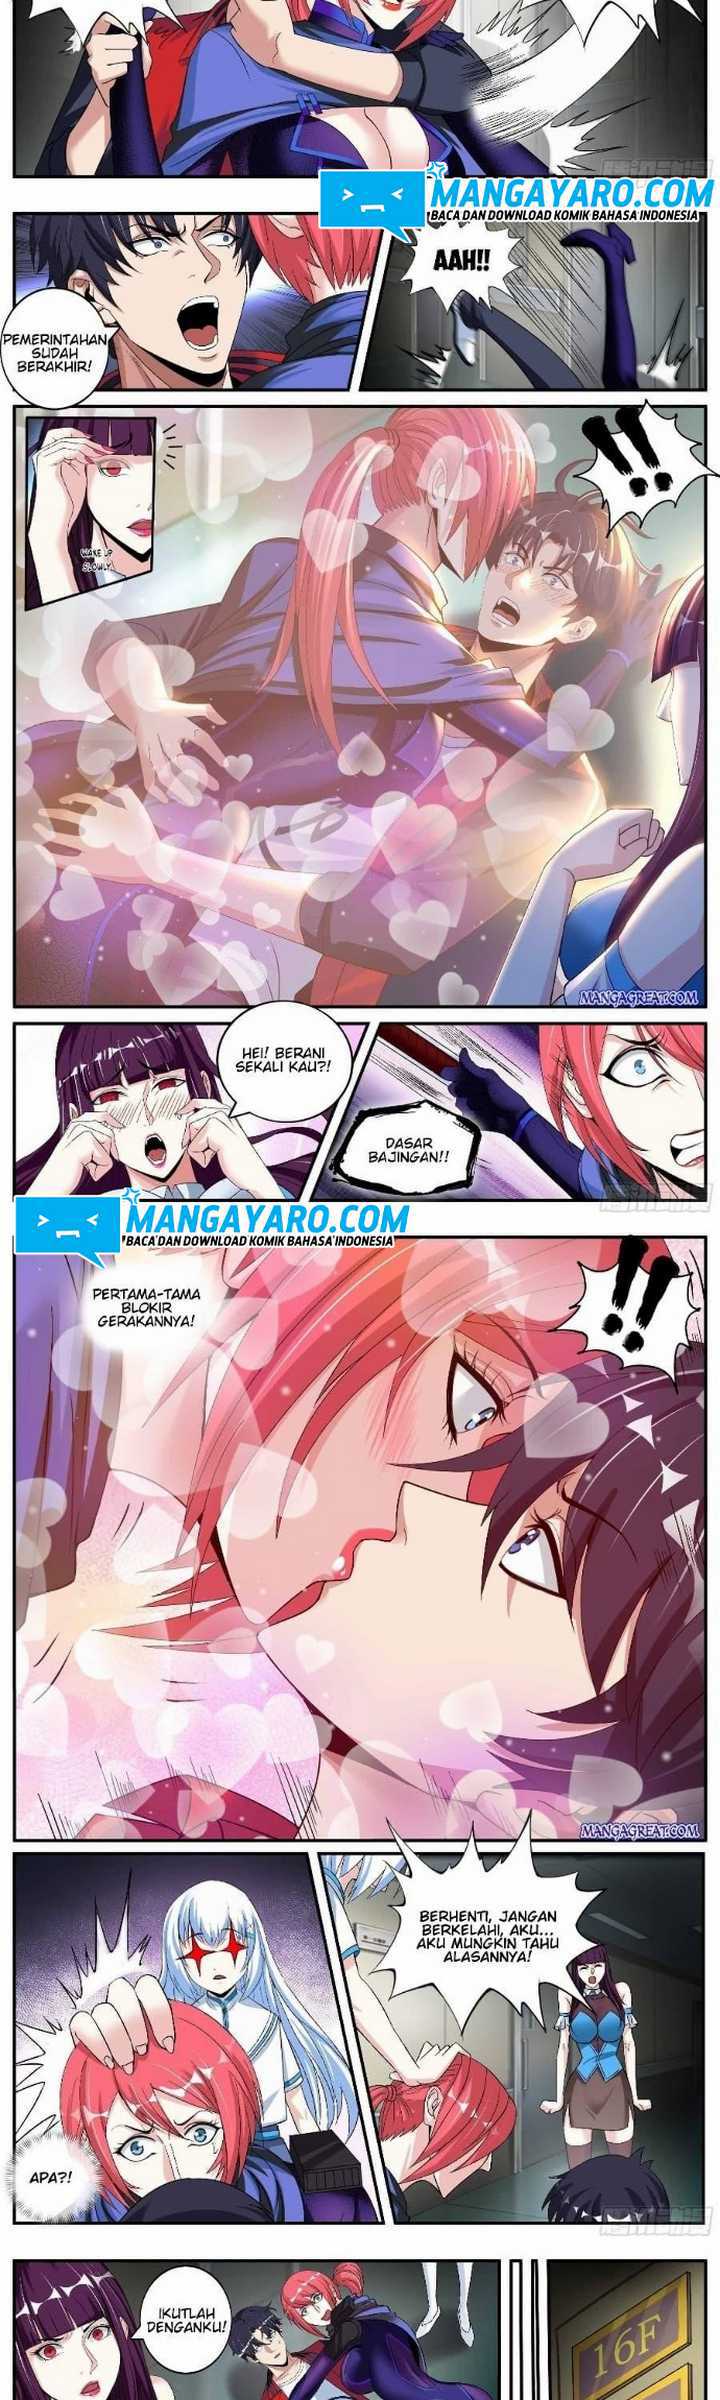 I Have An Apocalyptic Dungeon Chapter 11 bahasa indonesia